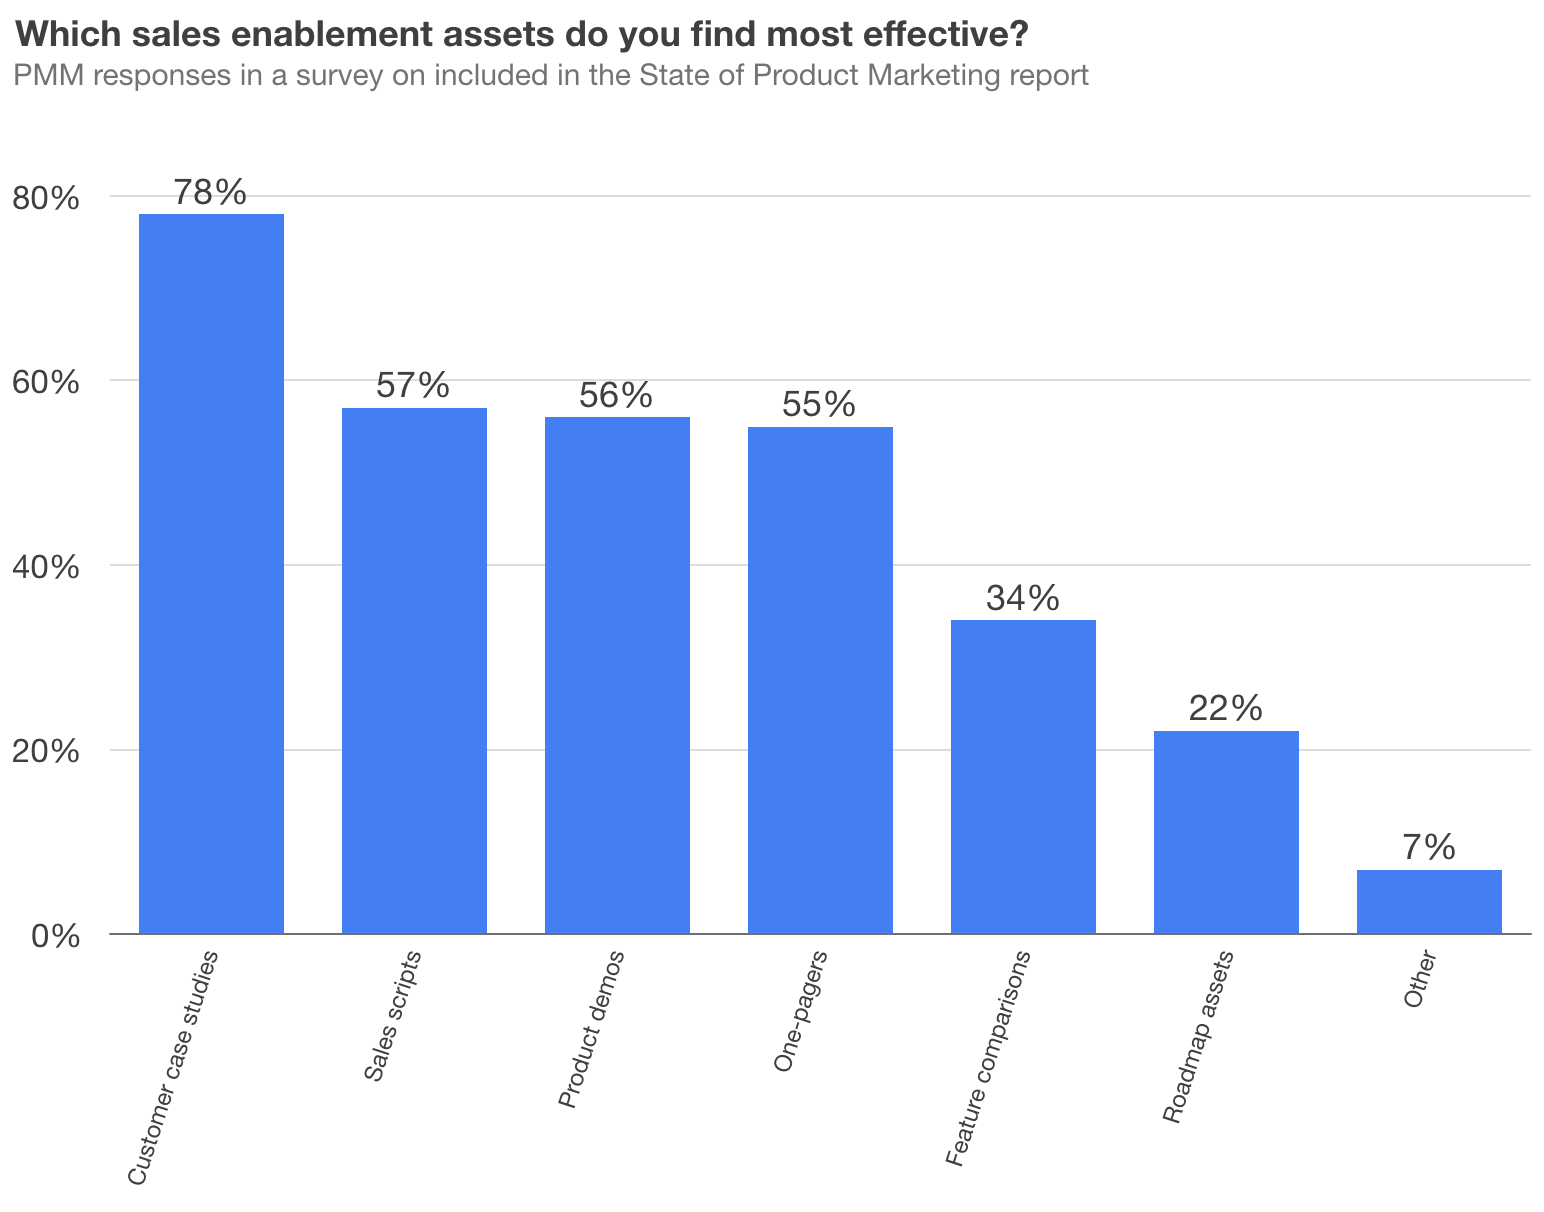 Survey results showing PMMs ranking of the most useful sales enablement assets